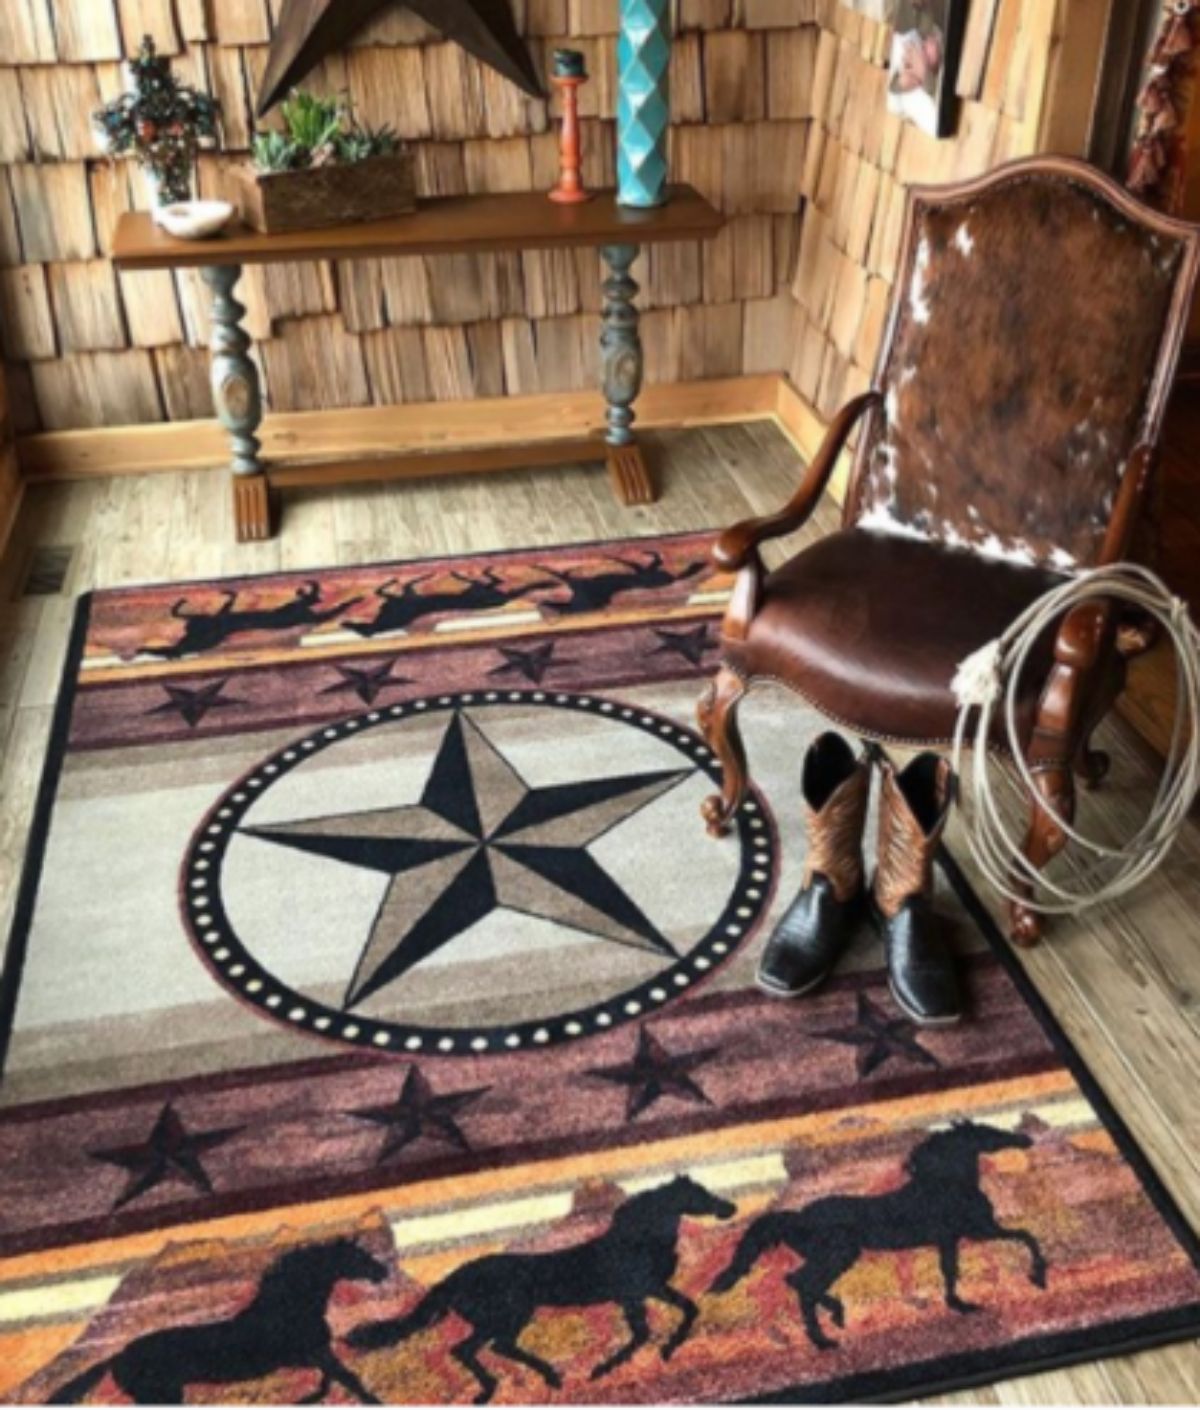 cowboy styled rug in a log home